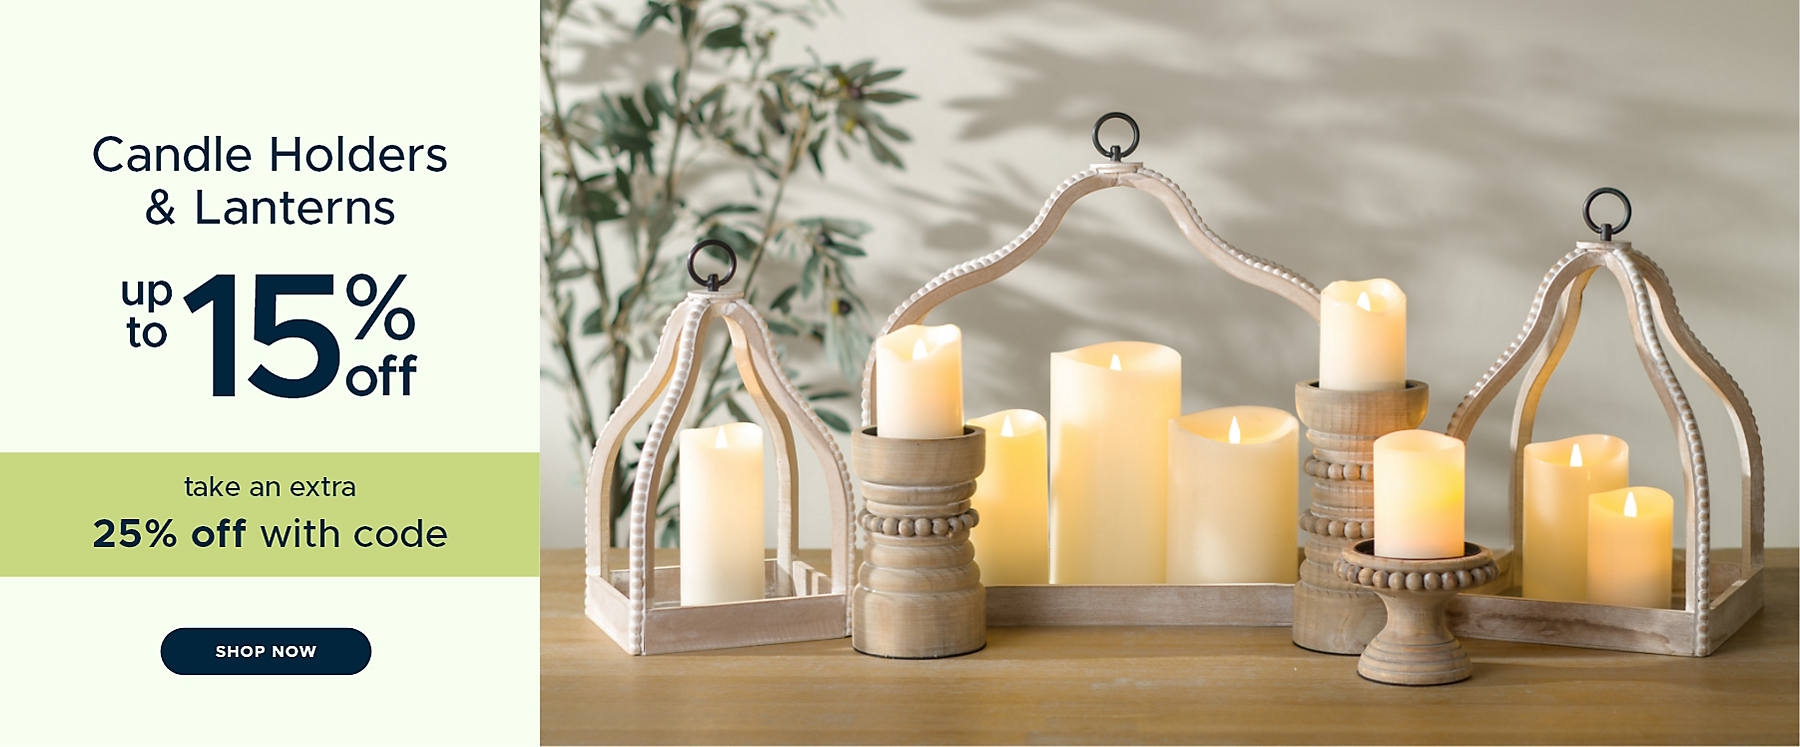 Candle Holders & Lanterns up to 15% off take an extra 25% off with code shop now